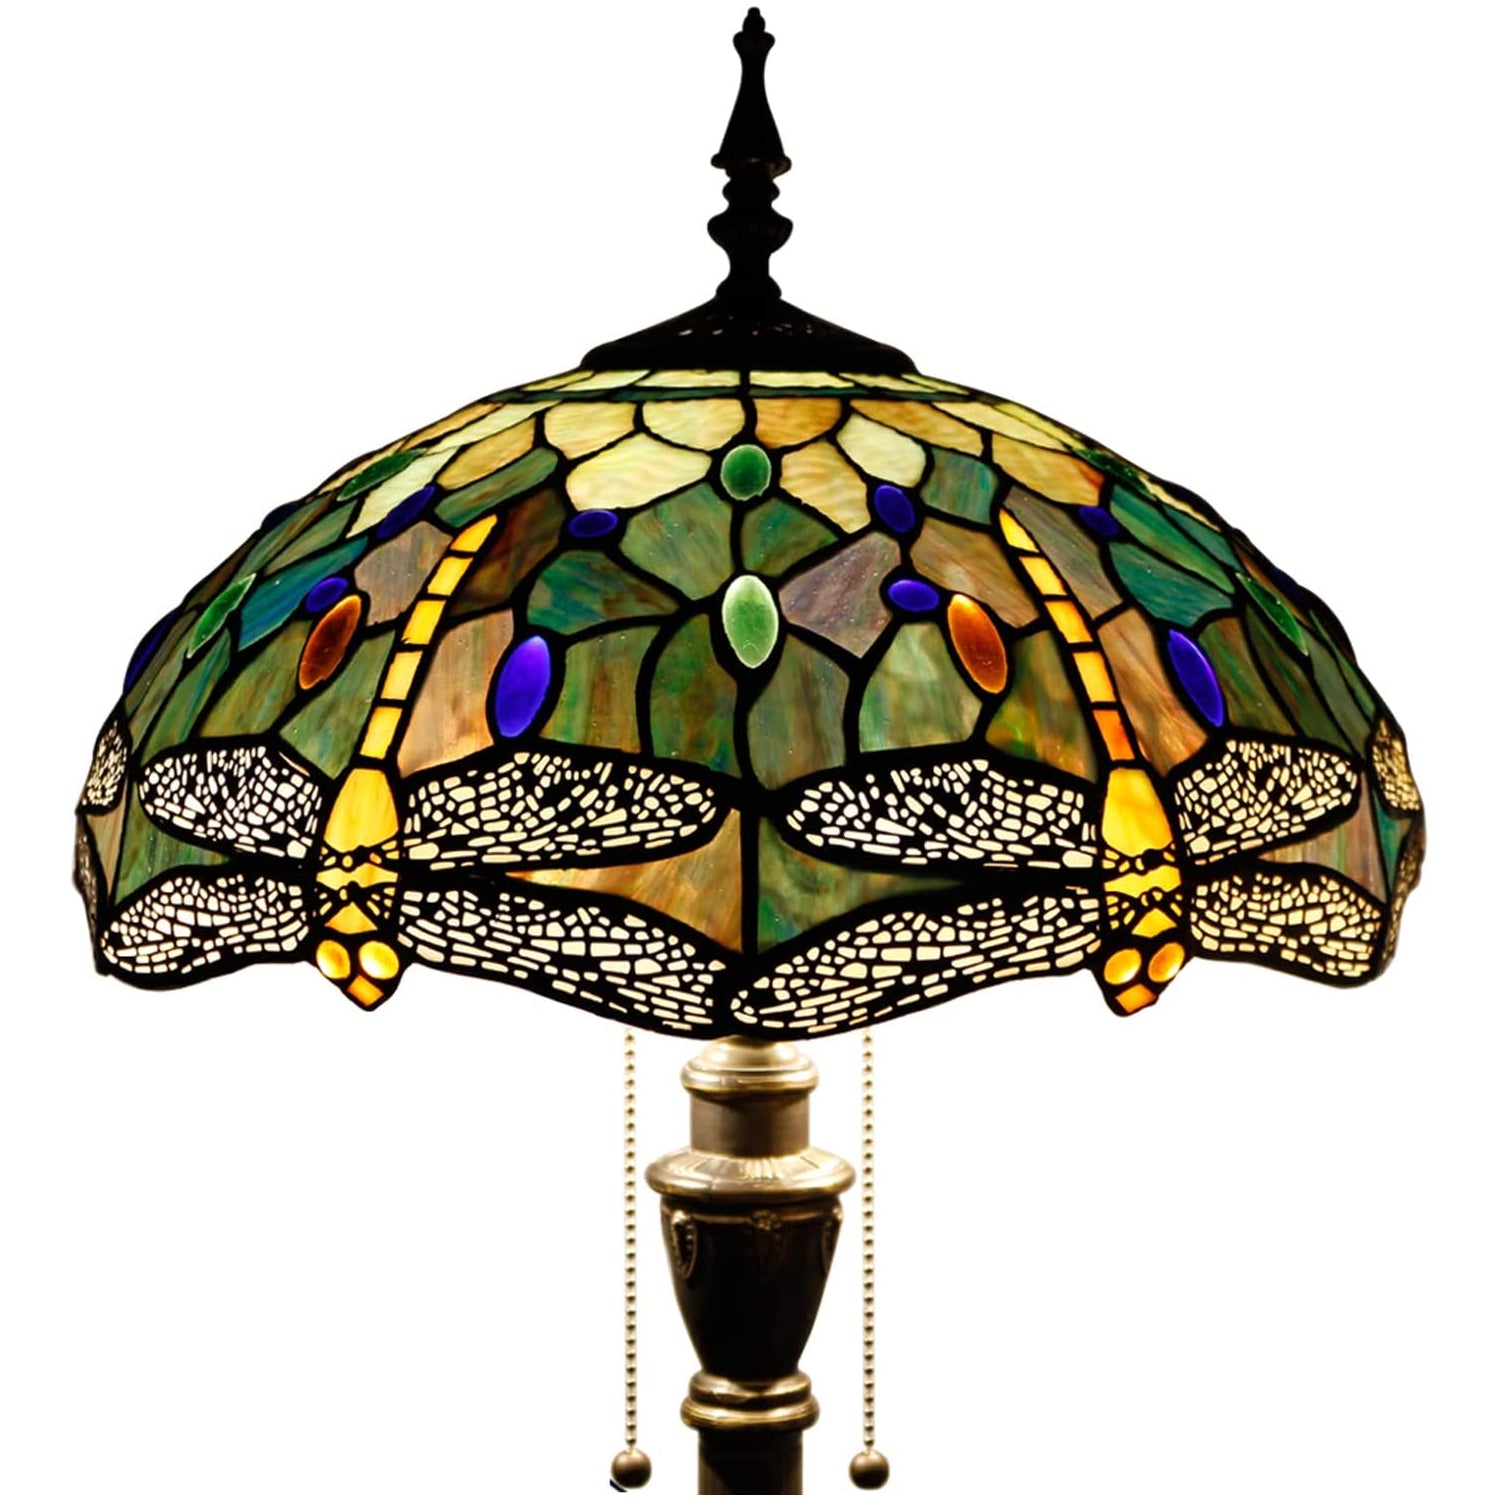 Werfactory® Tiffany Floor lamp, 70 inches high Dragonfly Style Stained Glass Light